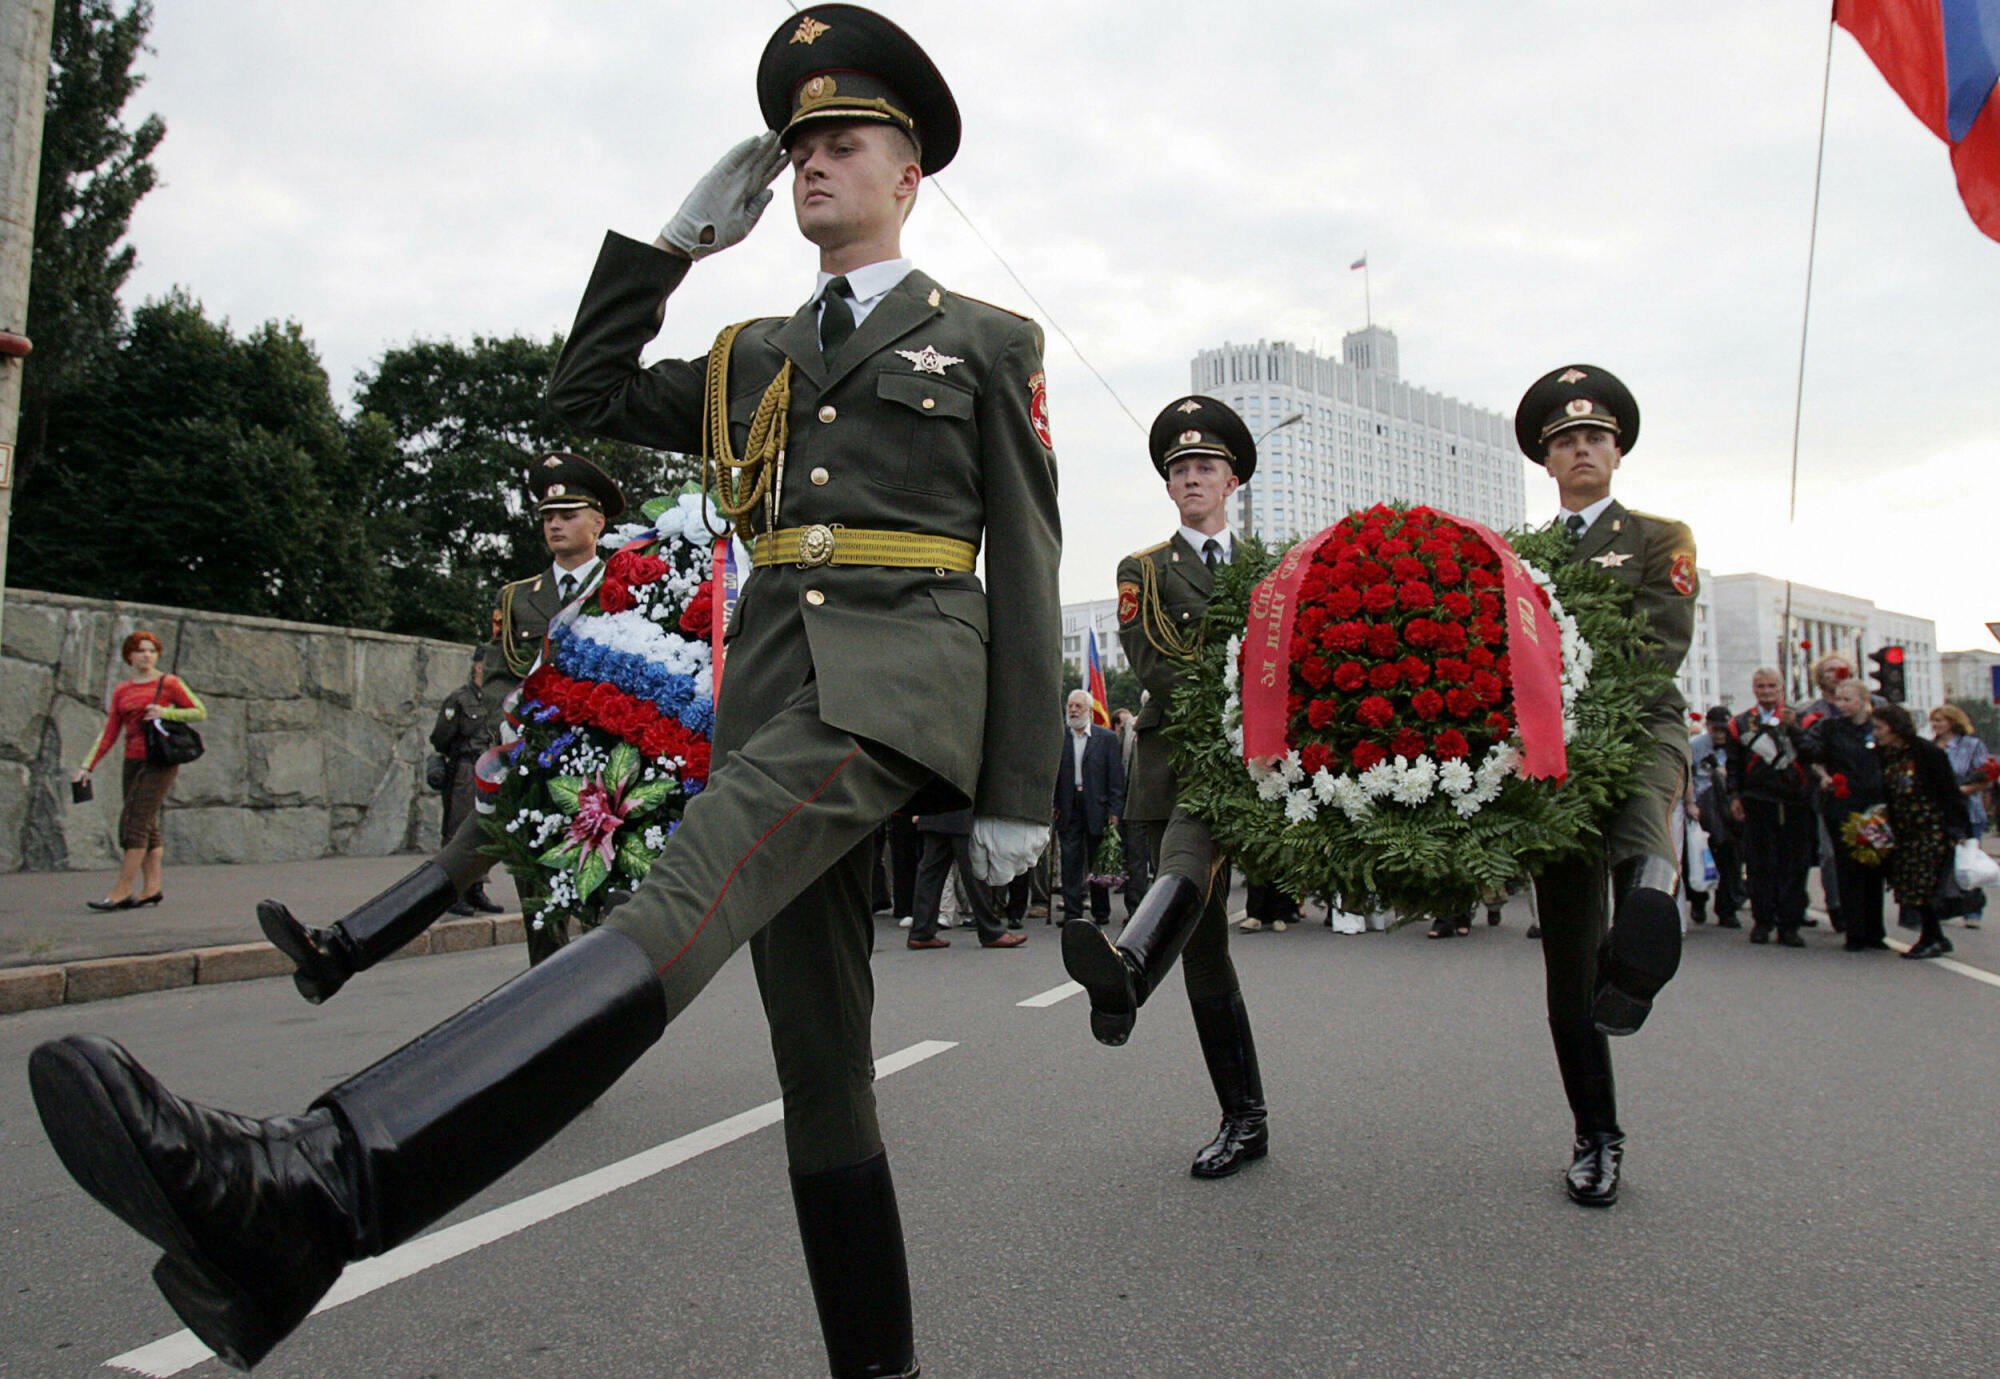 Russian soldiers on the 15th anniversary of the failure of the coup